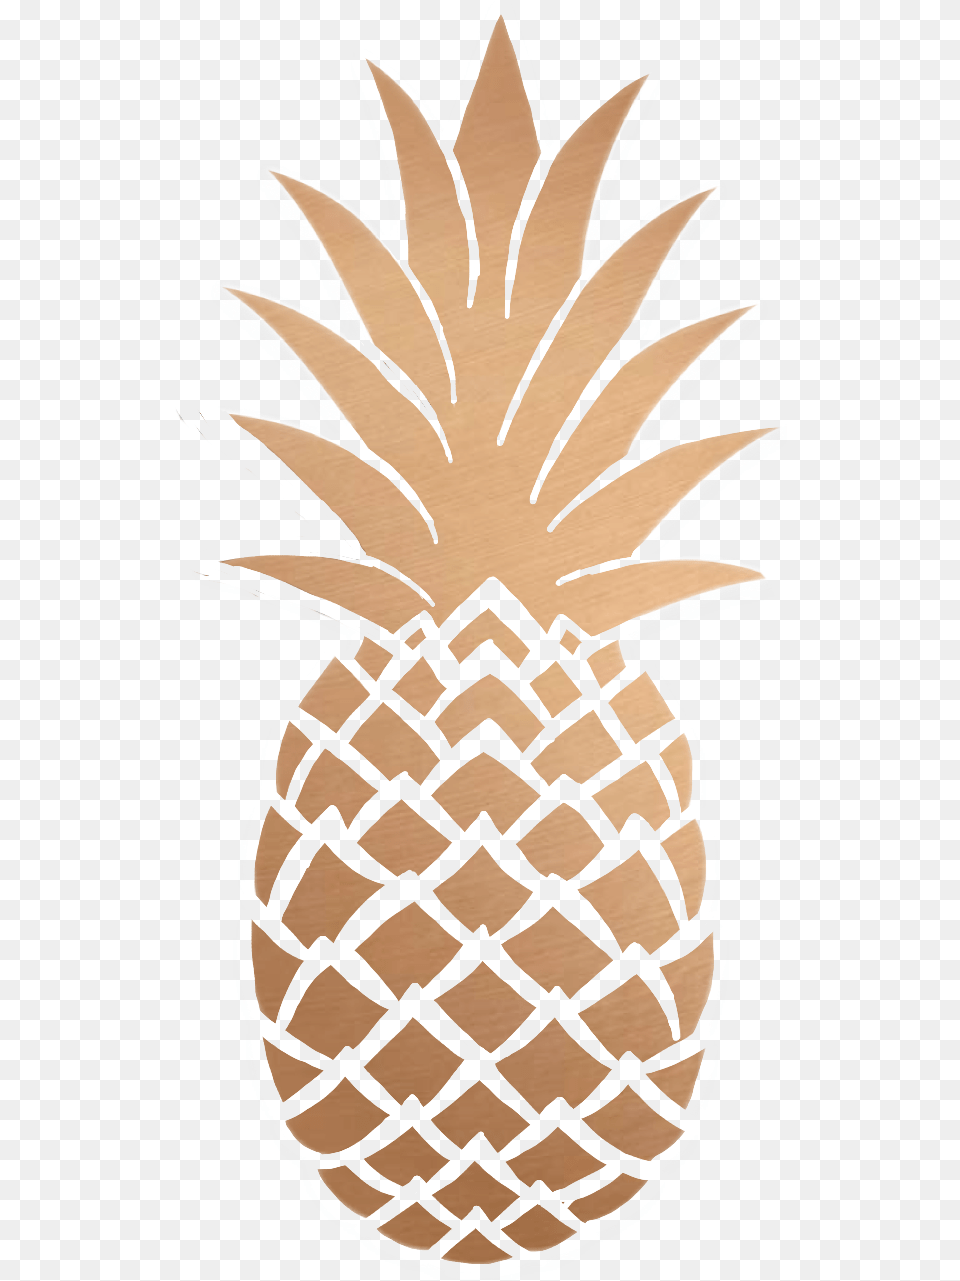 Download Sticker Pineapple Gold Interesting Art Tumblr Rose Gold Cute Phone Backgrounds, Food, Fruit, Plant, Produce Free Png